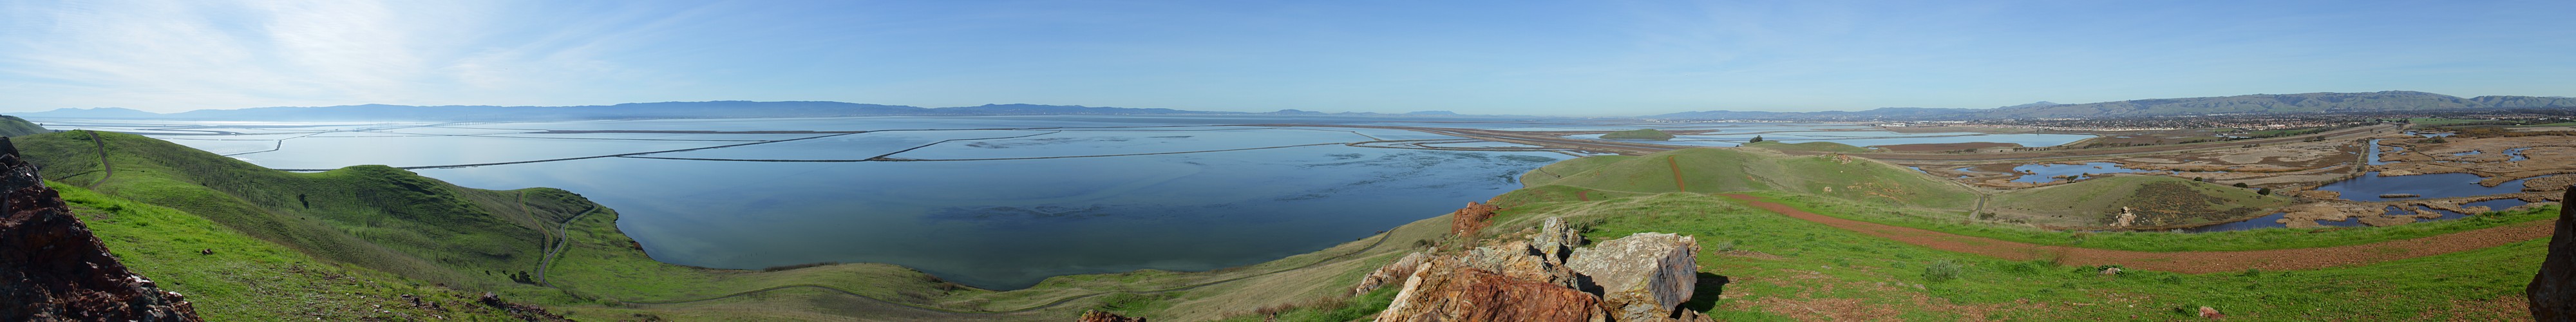 Panorama of San Francisco Bay from Coyote Hills